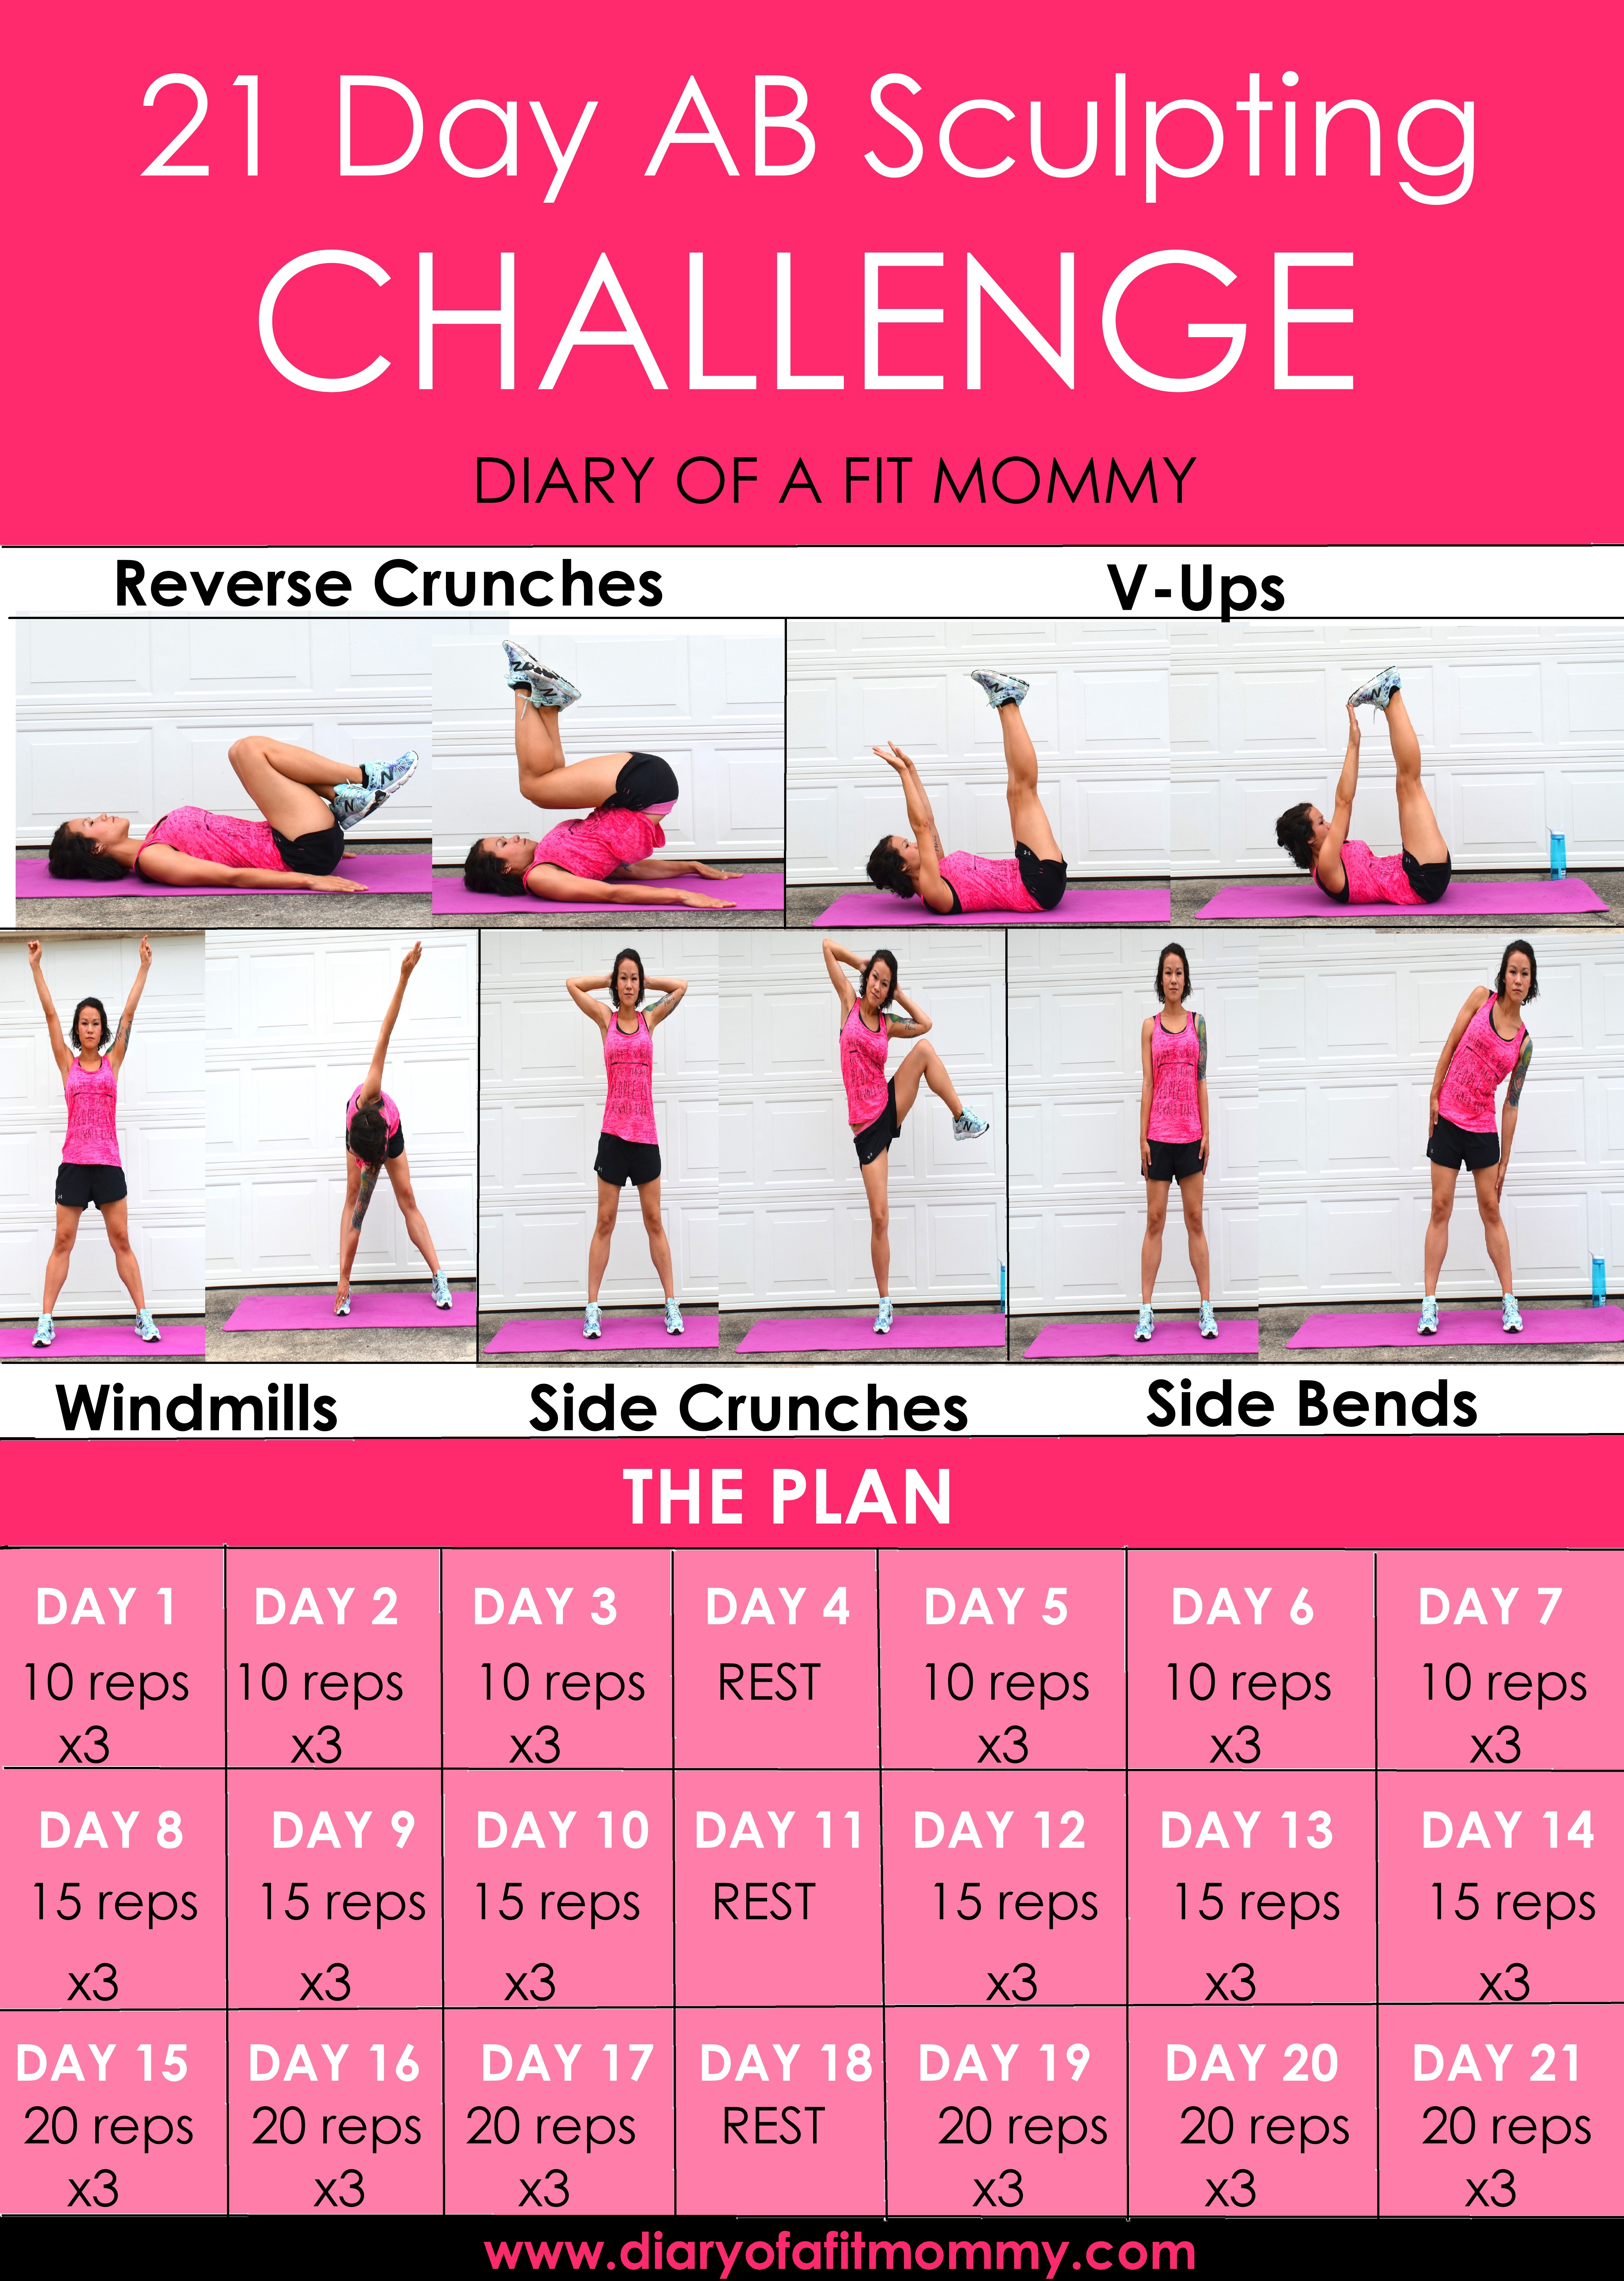 15 Minute 3 day gym workout program with Comfort Workout Clothes